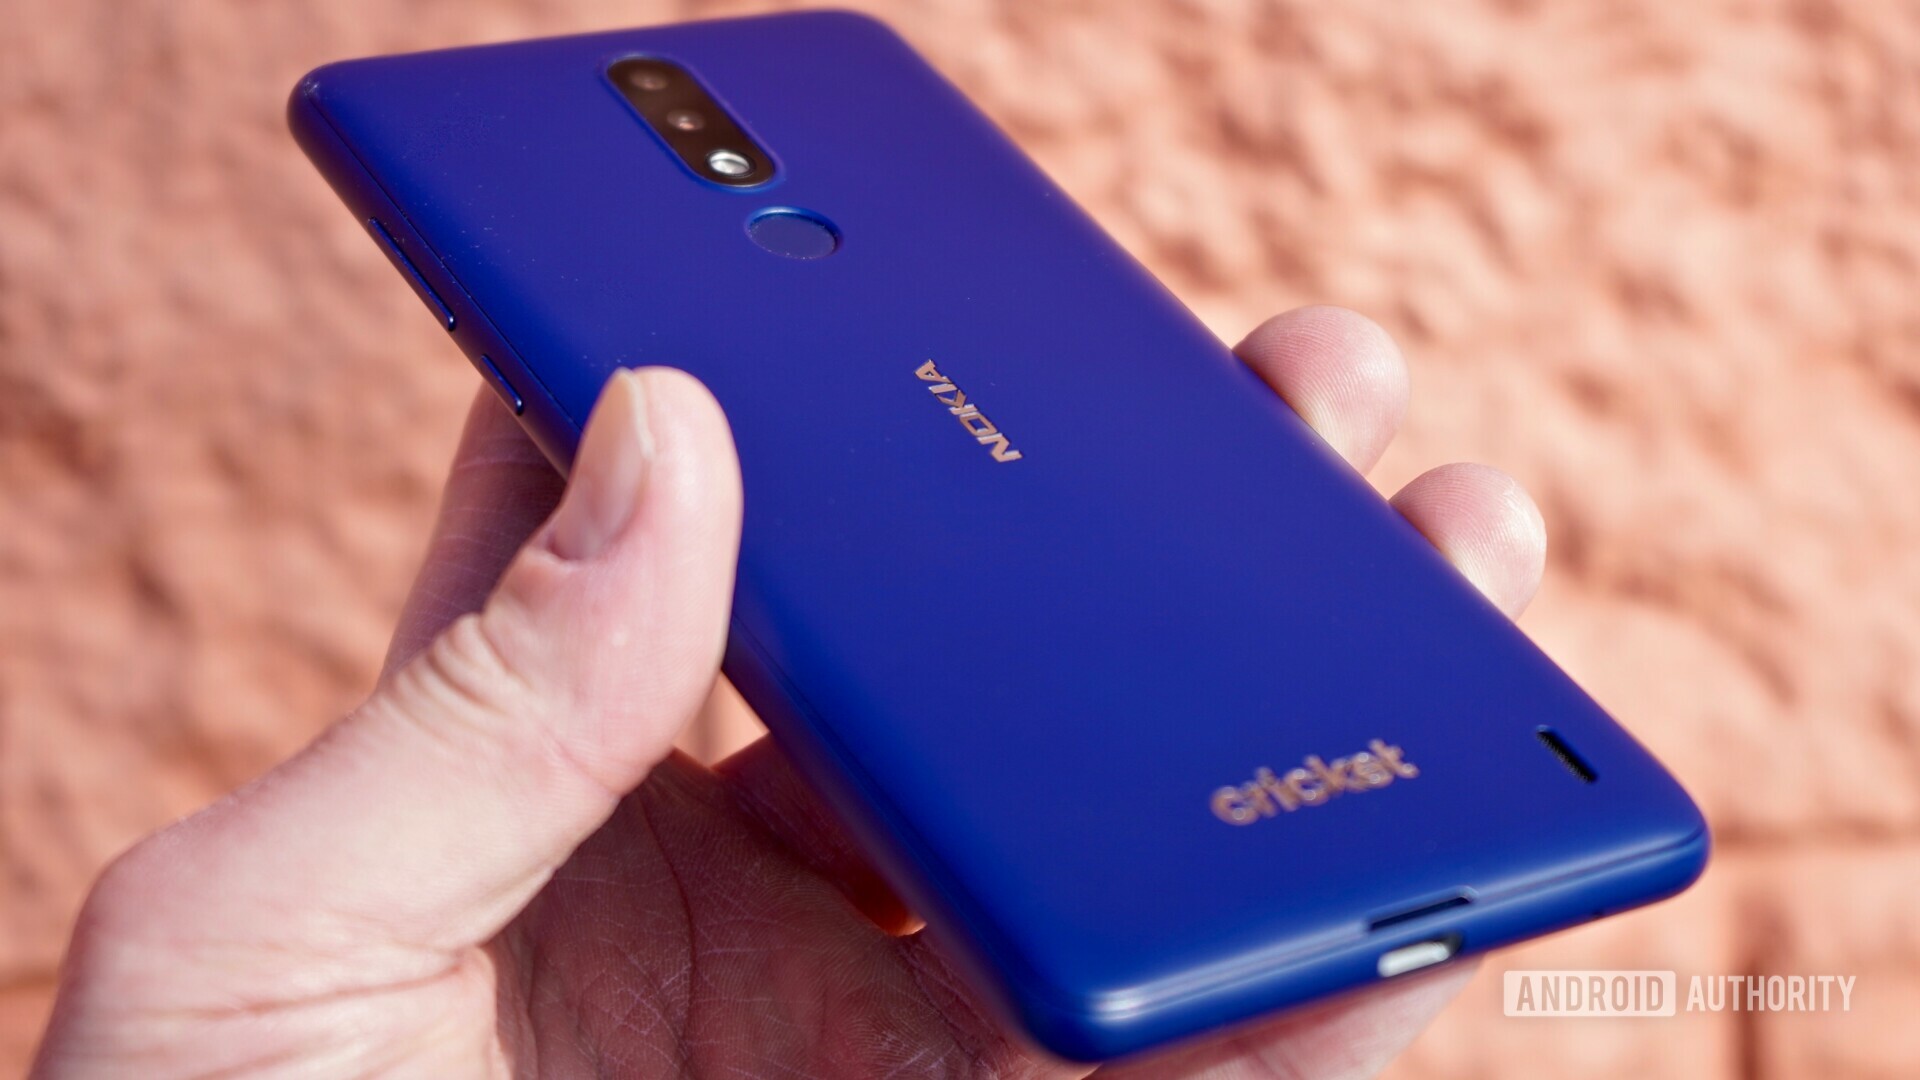 View of the Blue Nokia 3.1 Plus held in a hand.